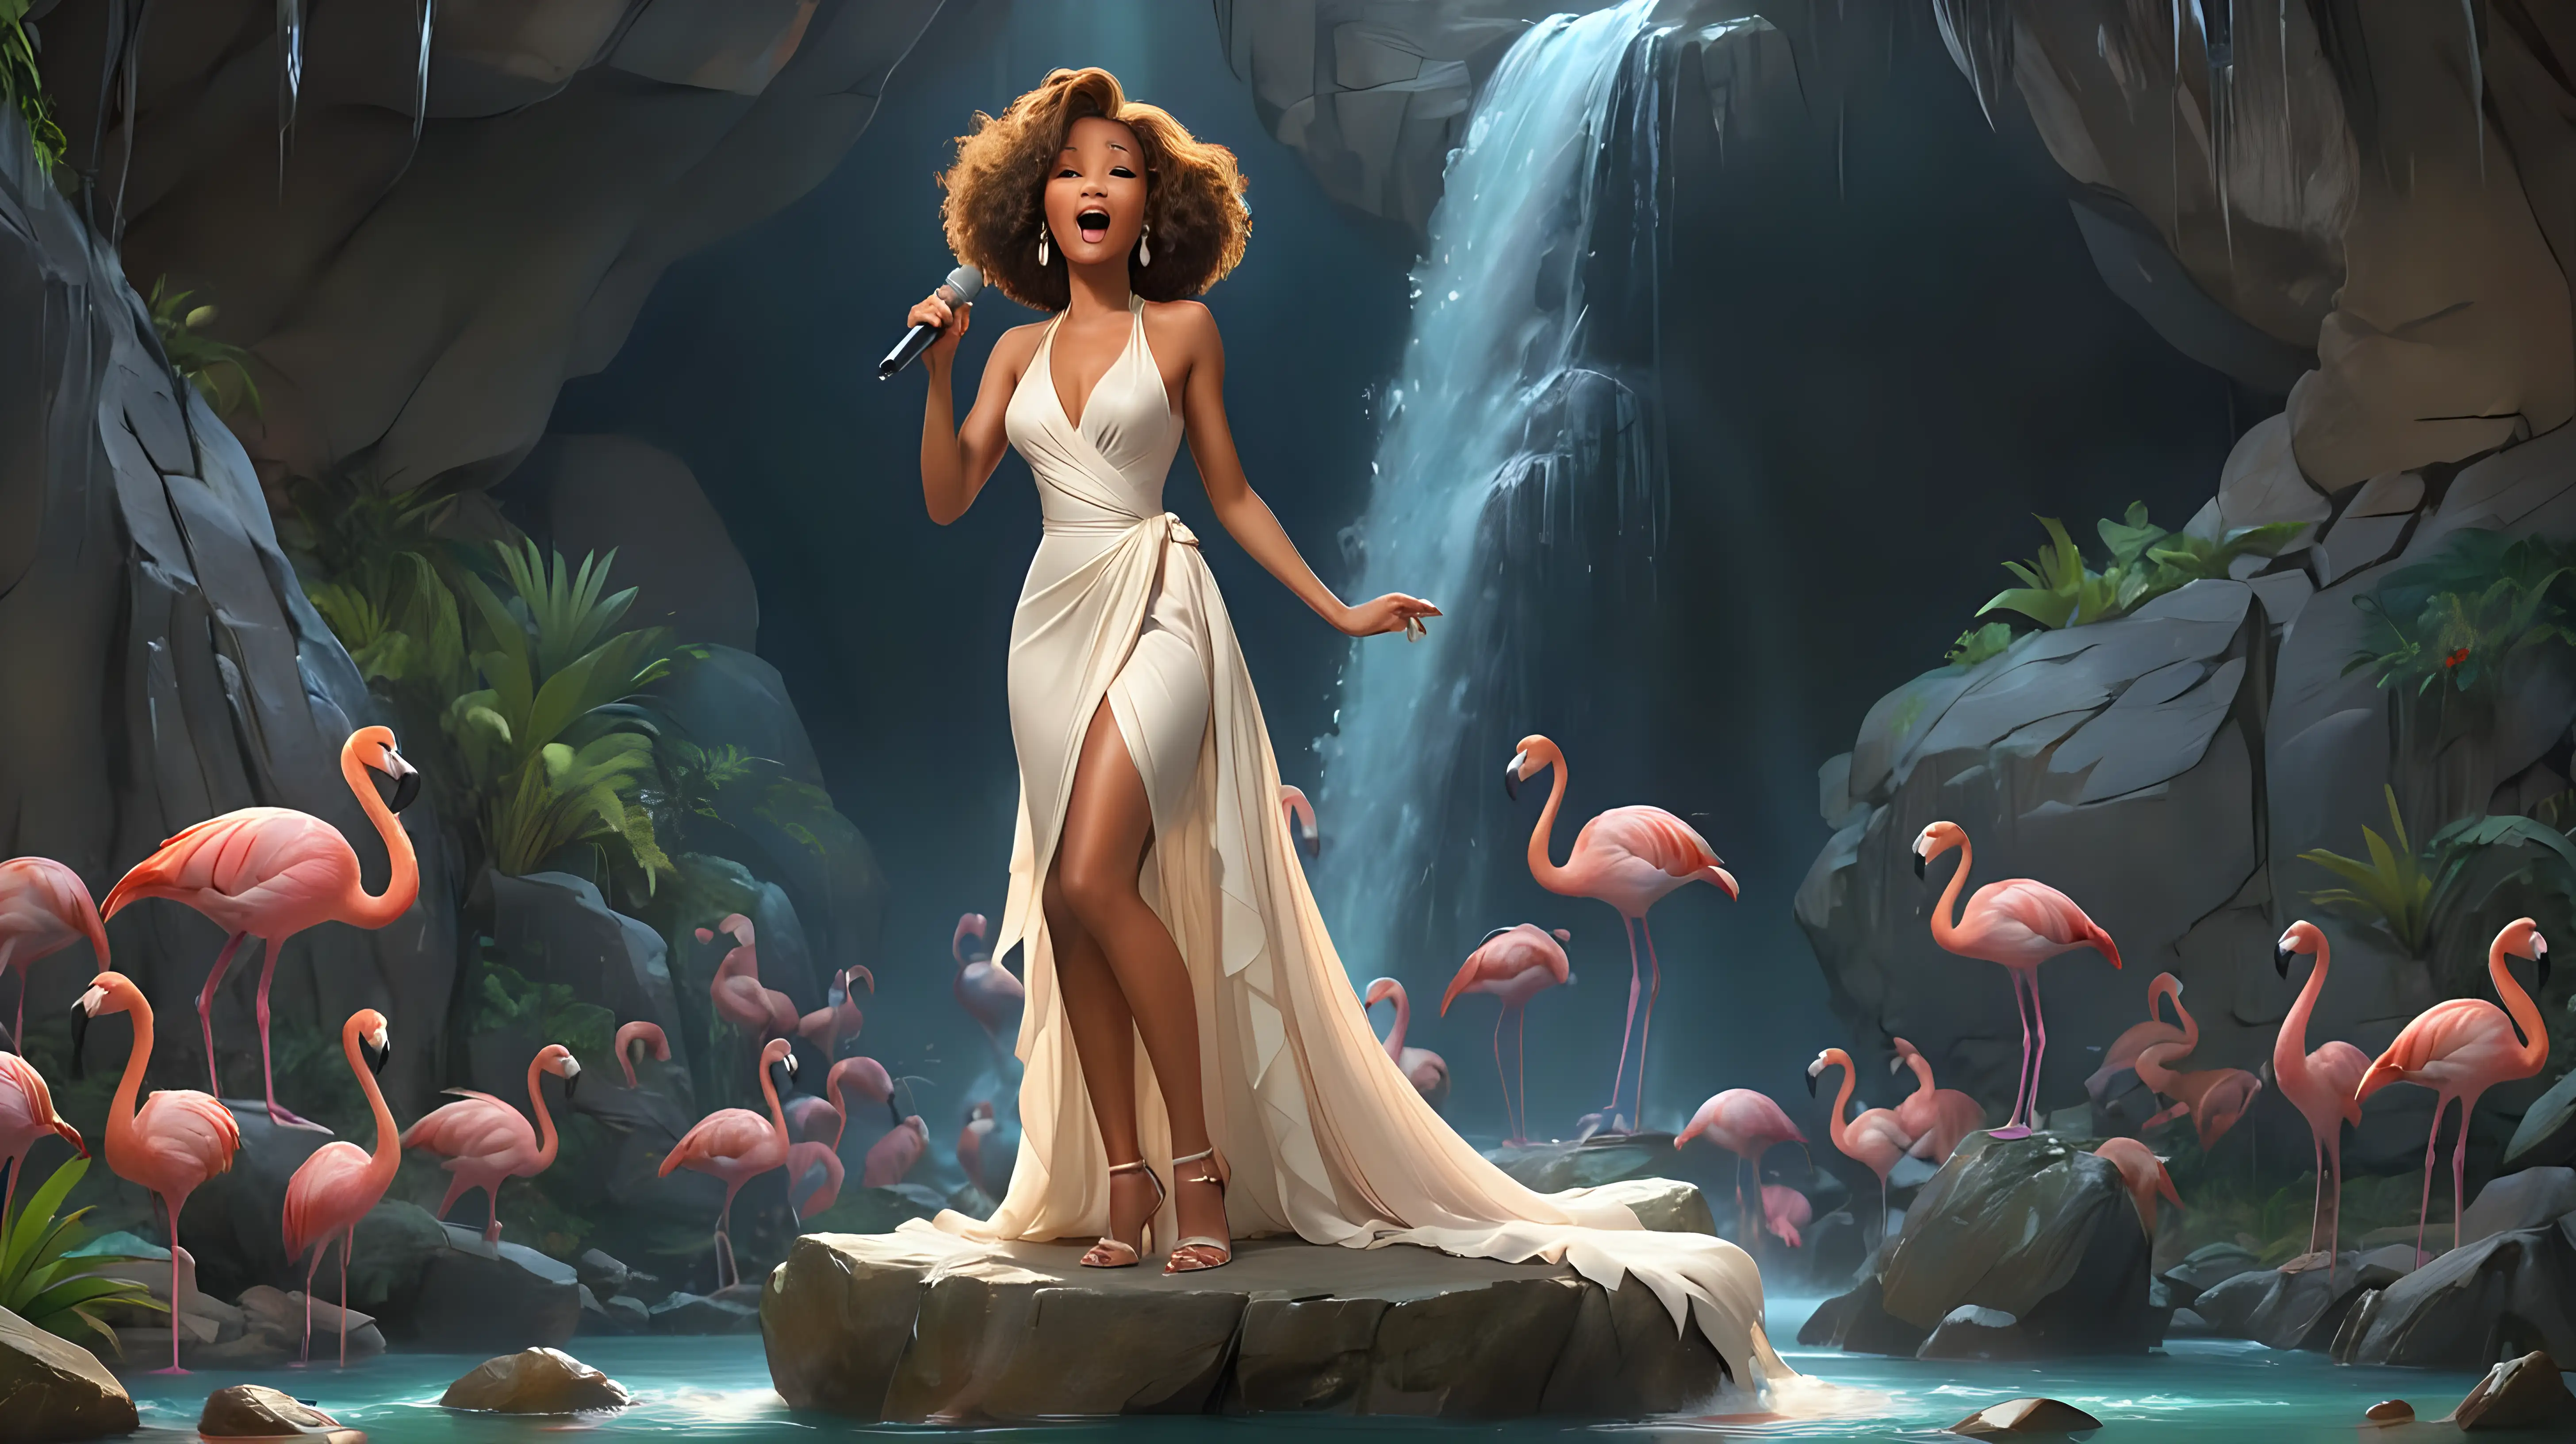 Whitney houston in a dress with slit in heels on a rock, full body, singing into a microphone, in a cave with flamingos behind her rocks at the bottom with a water fall  , pixar style Maya